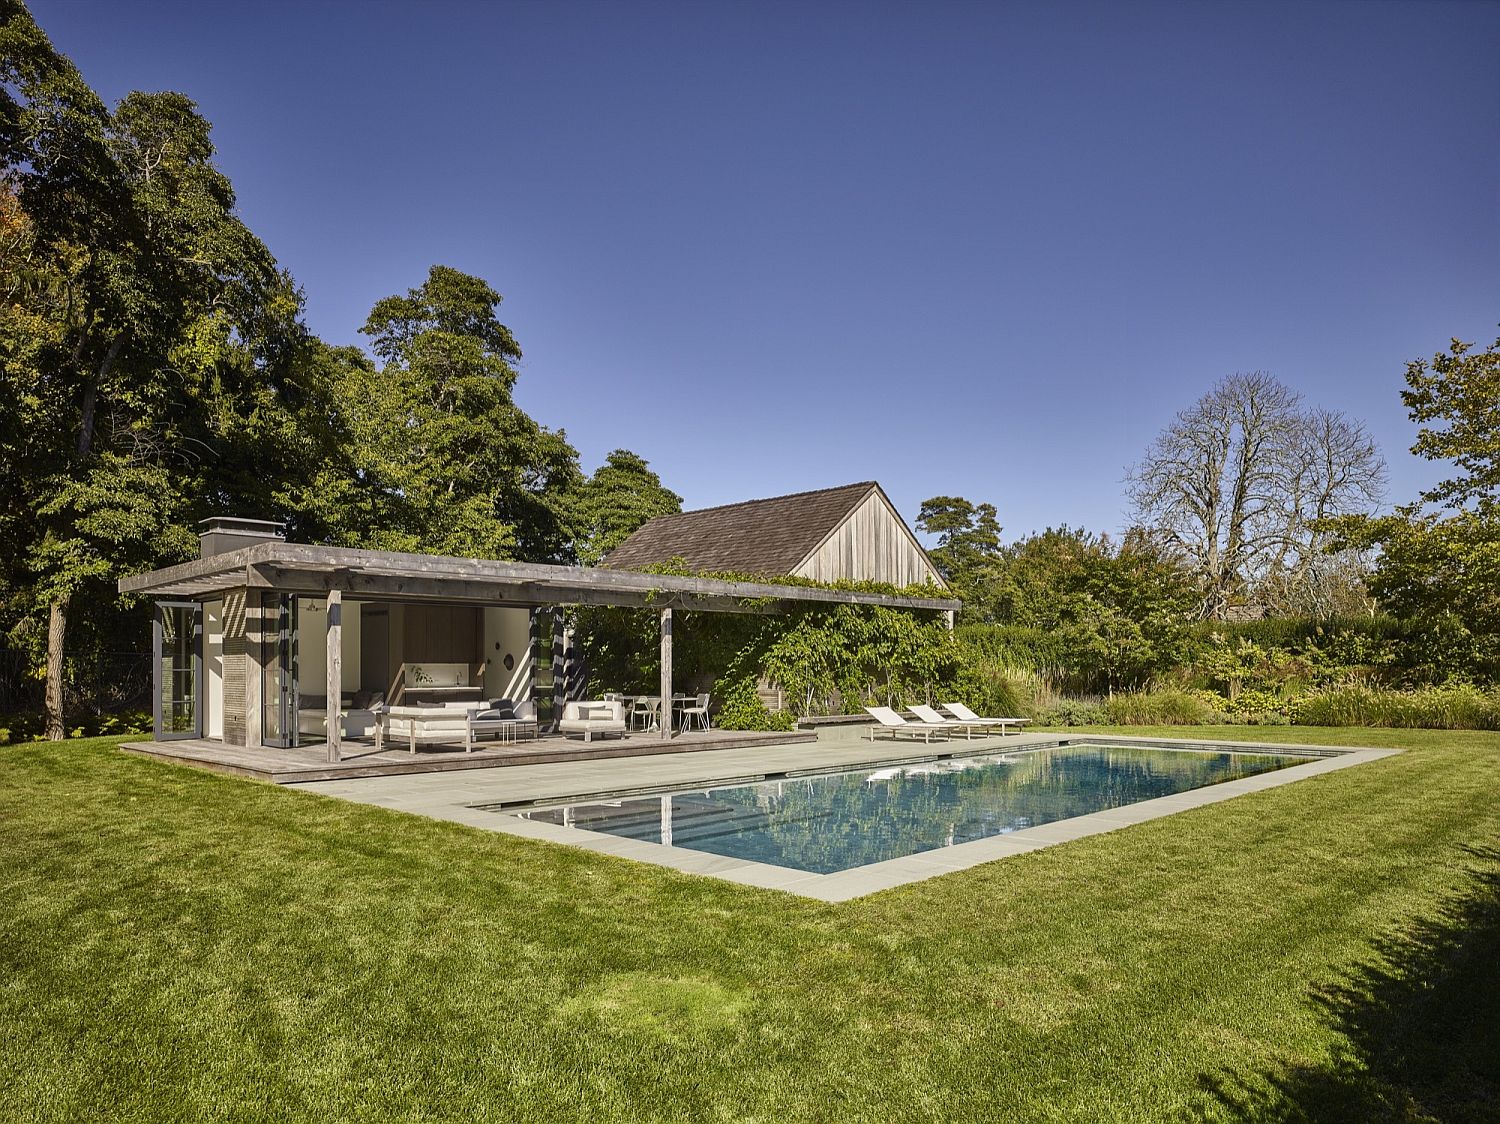 Pool-house-blends-in-with-the-backdrop-effortlessly